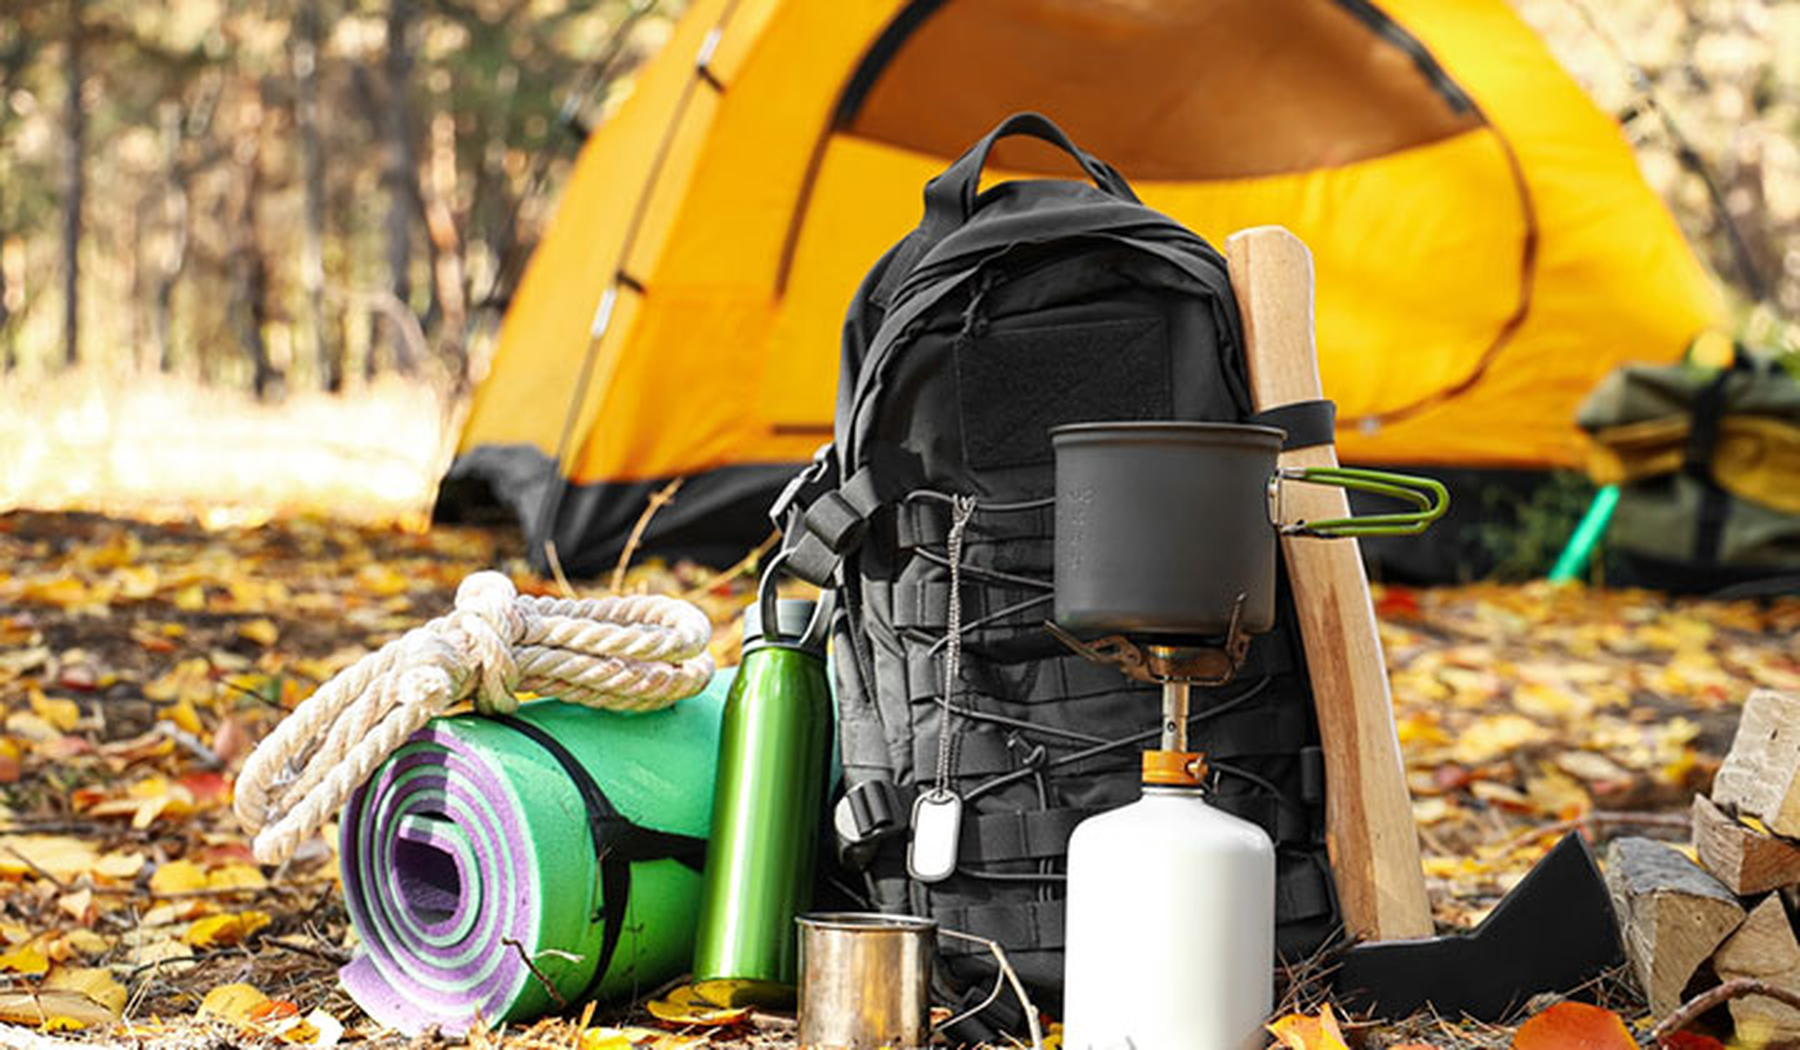 Camping gear piled by a tent